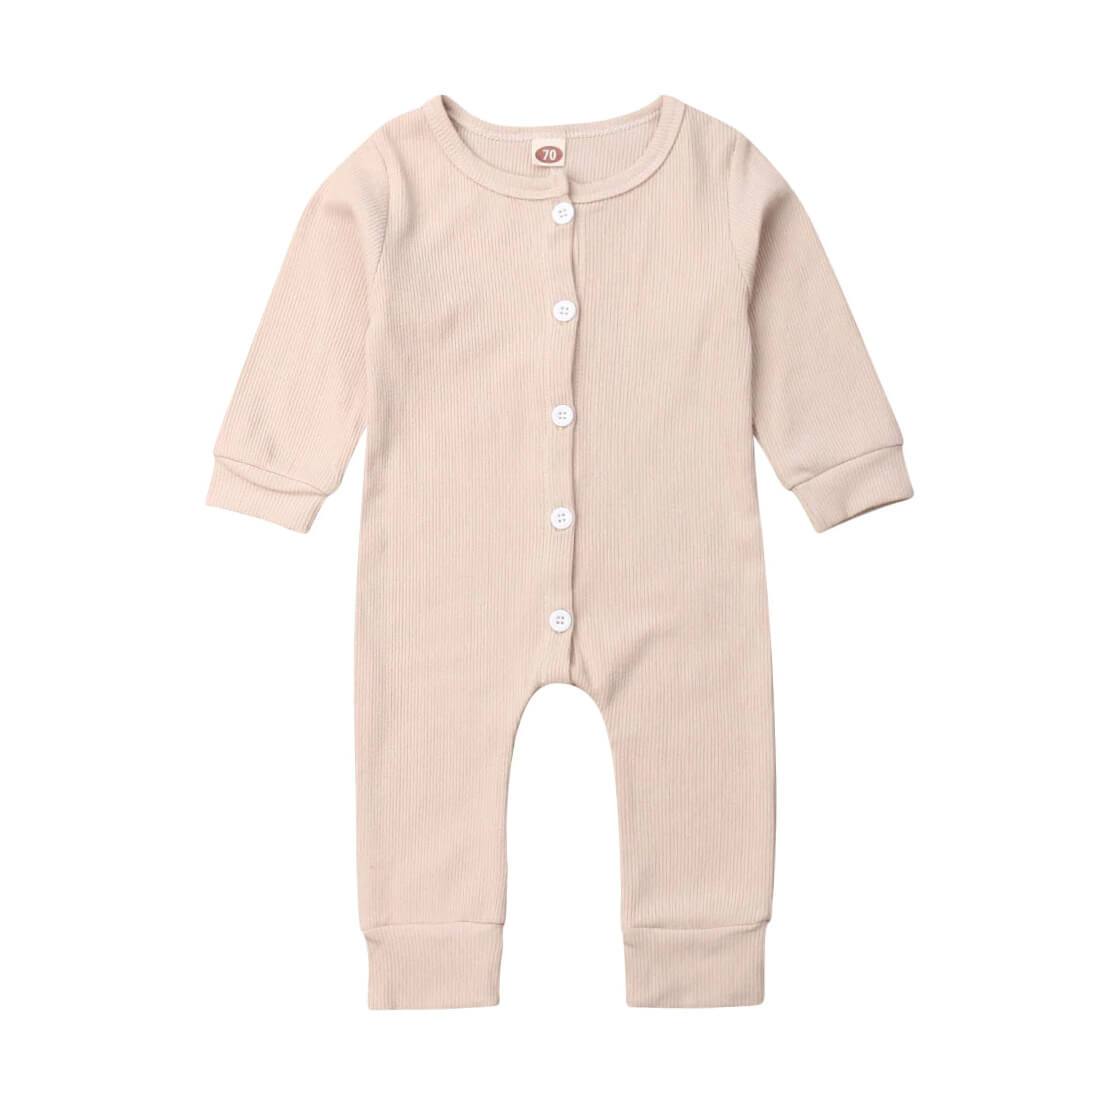 Long Sleeve Solid Baby Jumpsuit Beige Yellow 12-18 M 